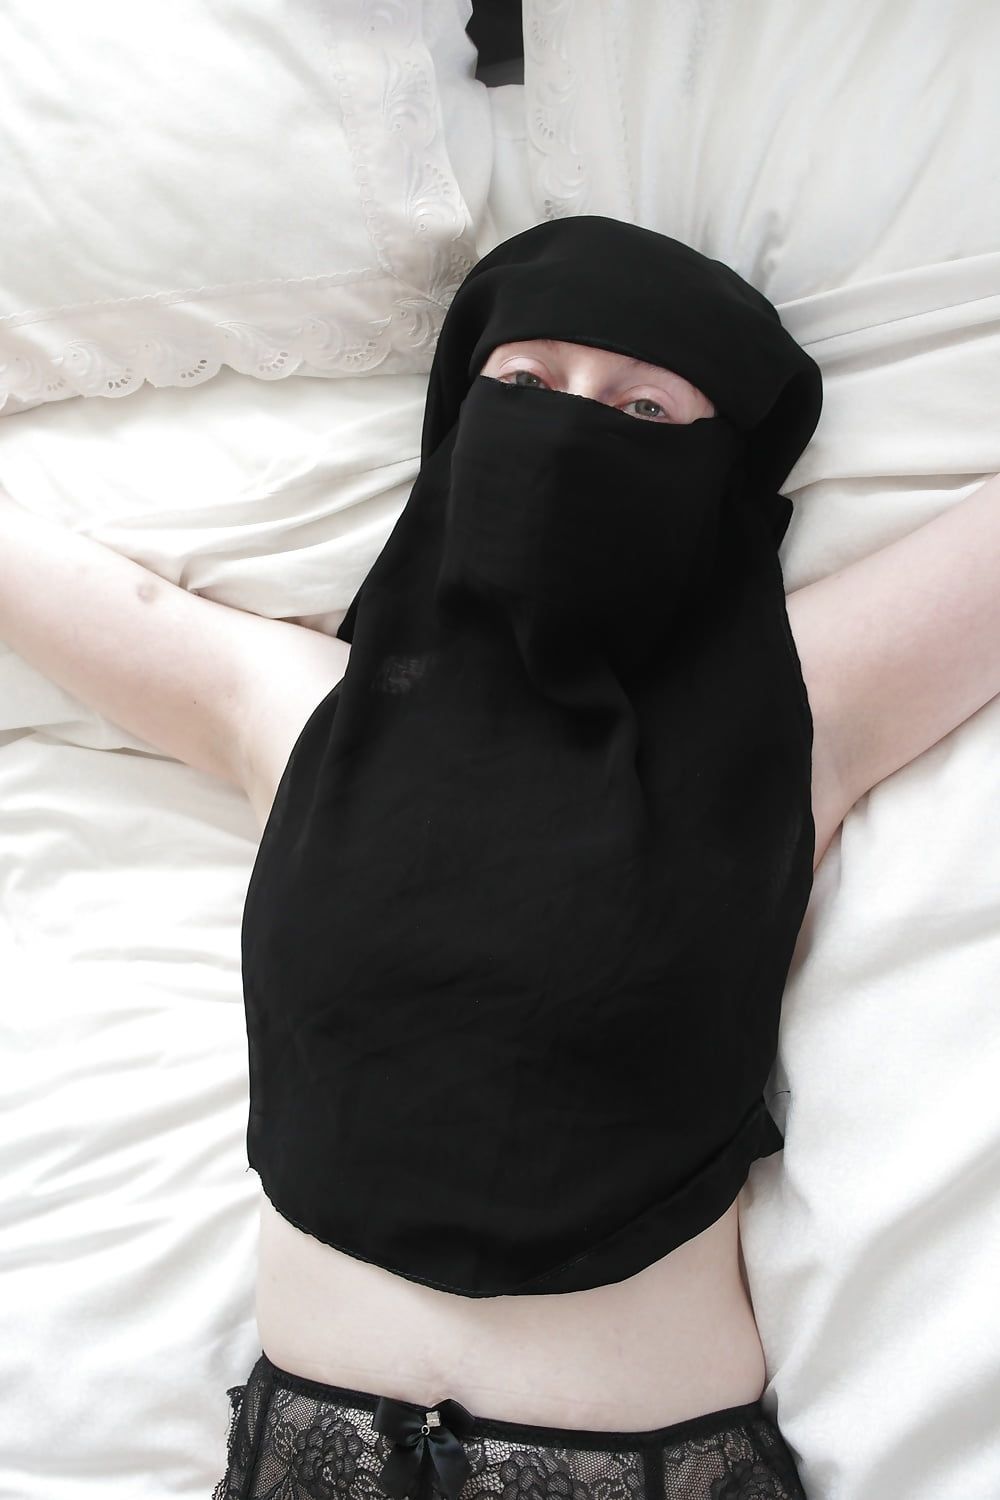 Niqab girl in Stockings Tied spread Eagle #5